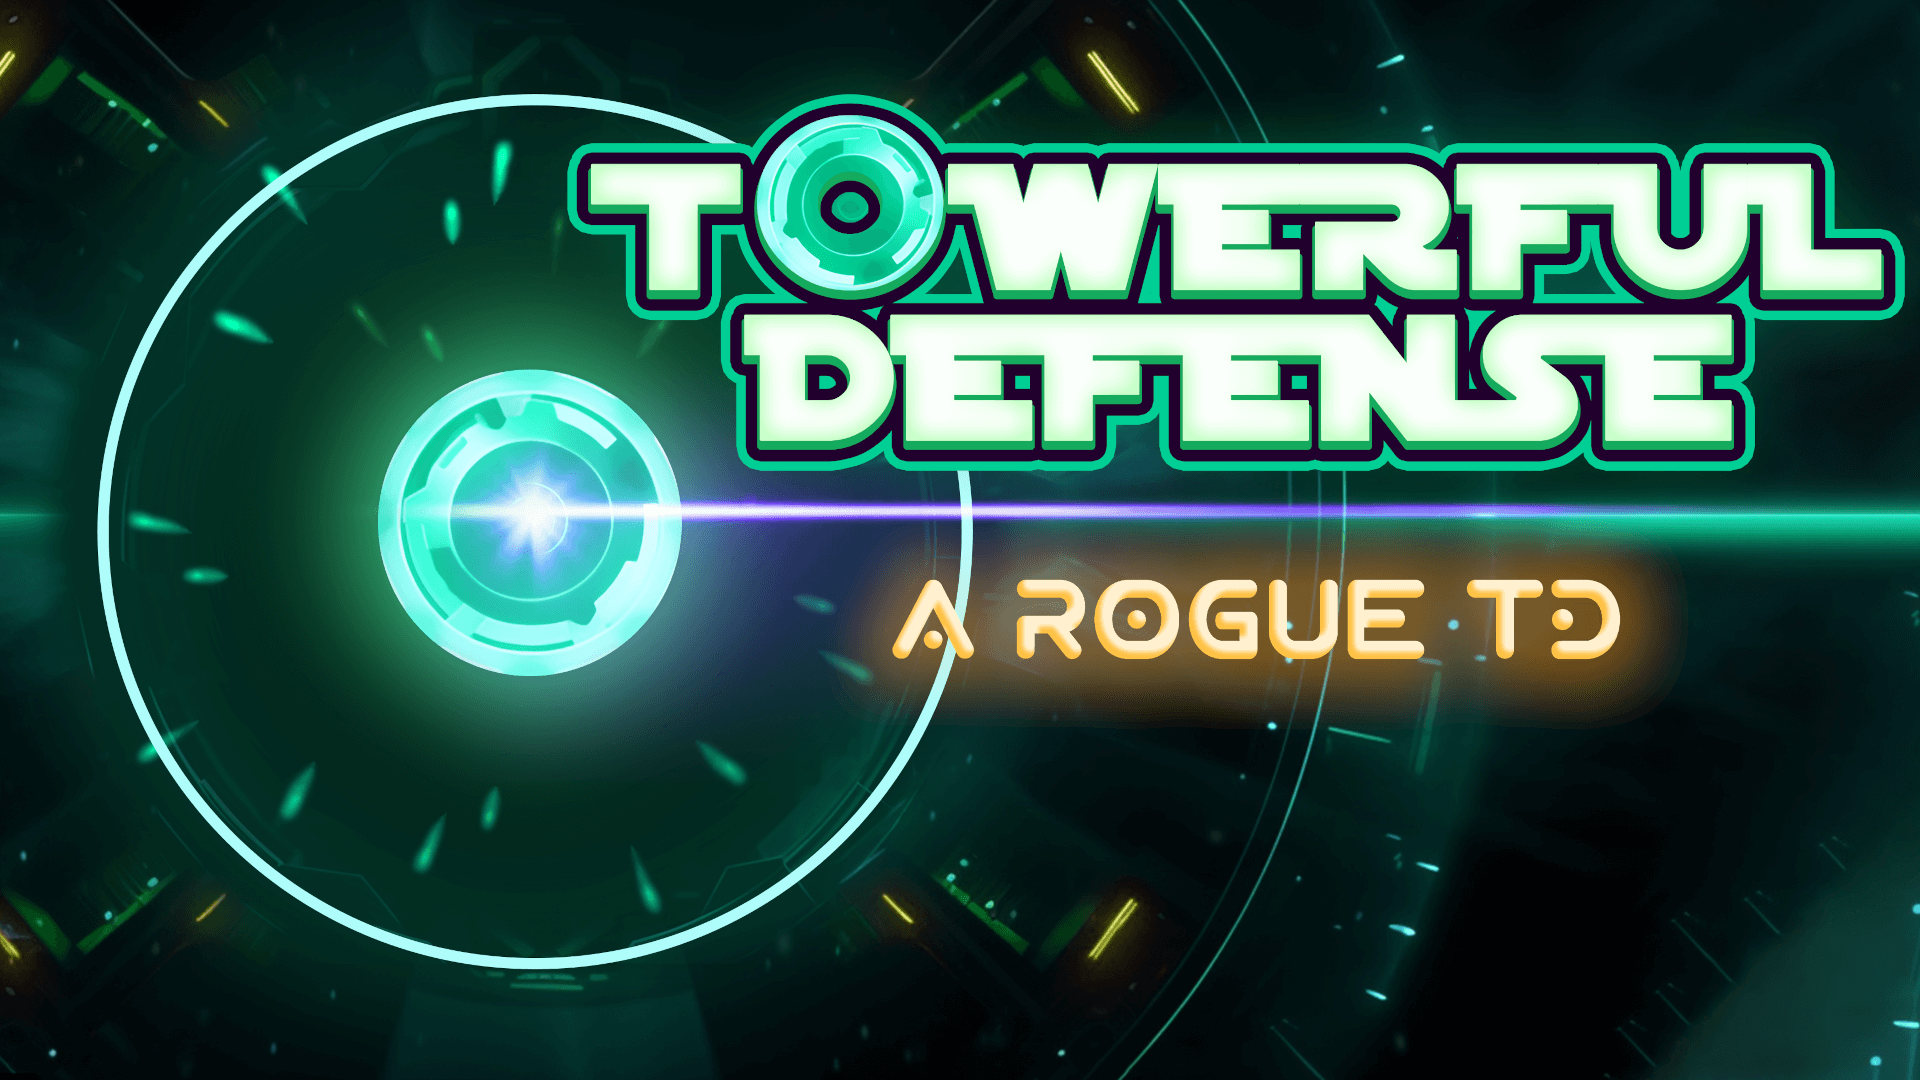 Towerful Defense Banner